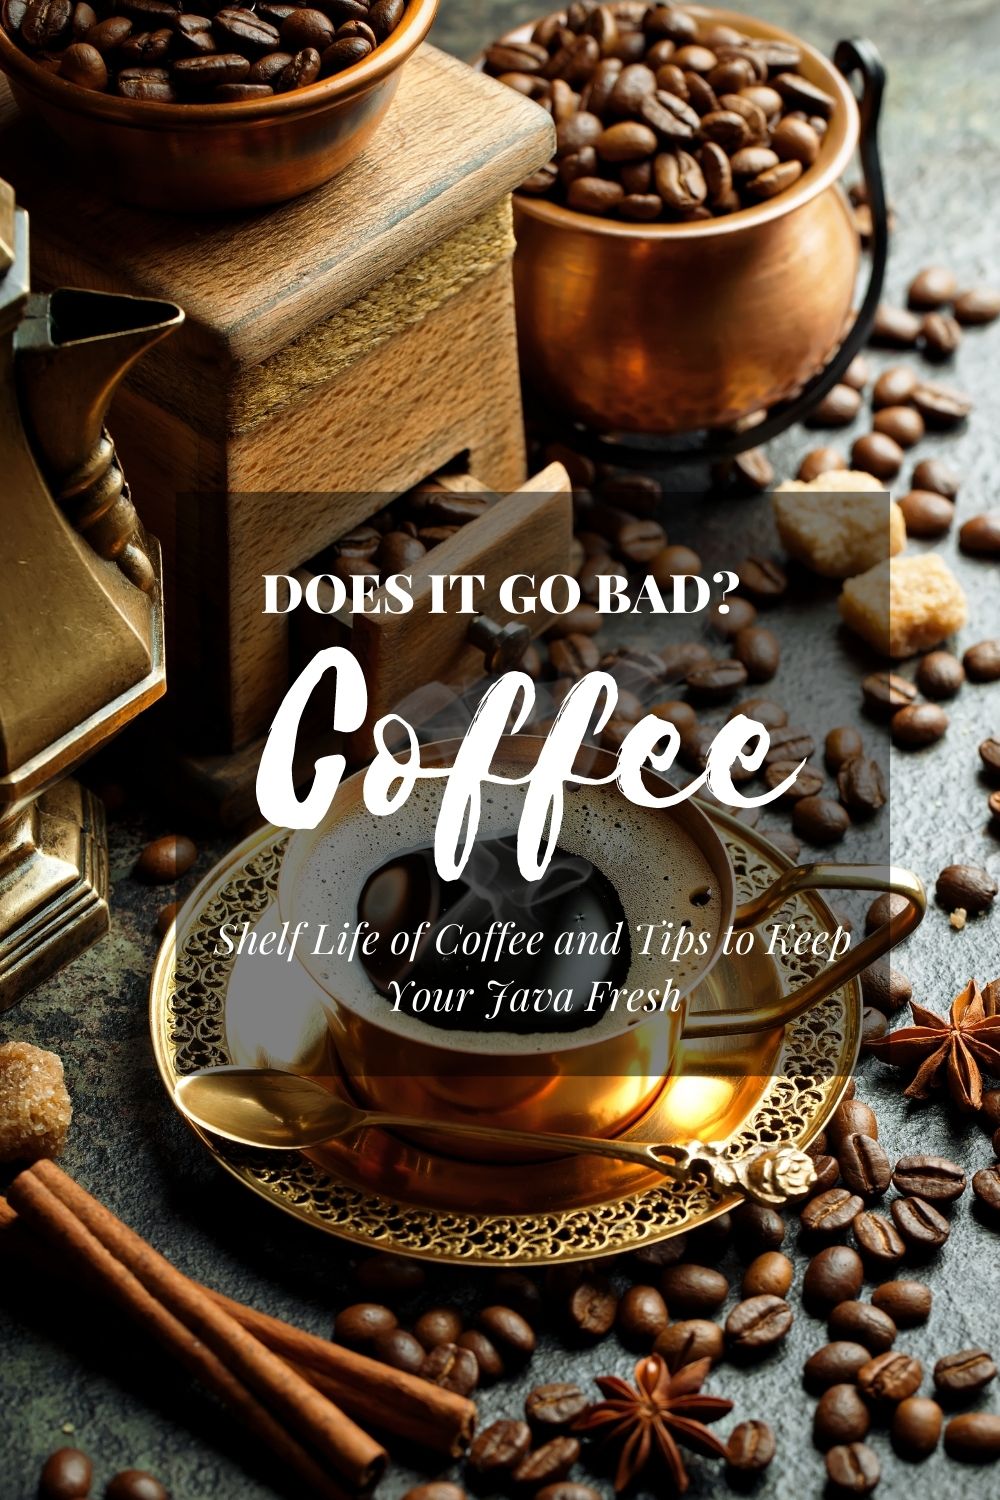 Does Coffee Go Bad? Shelf Life of Coffee and Tips to Keep Your Java Fresh